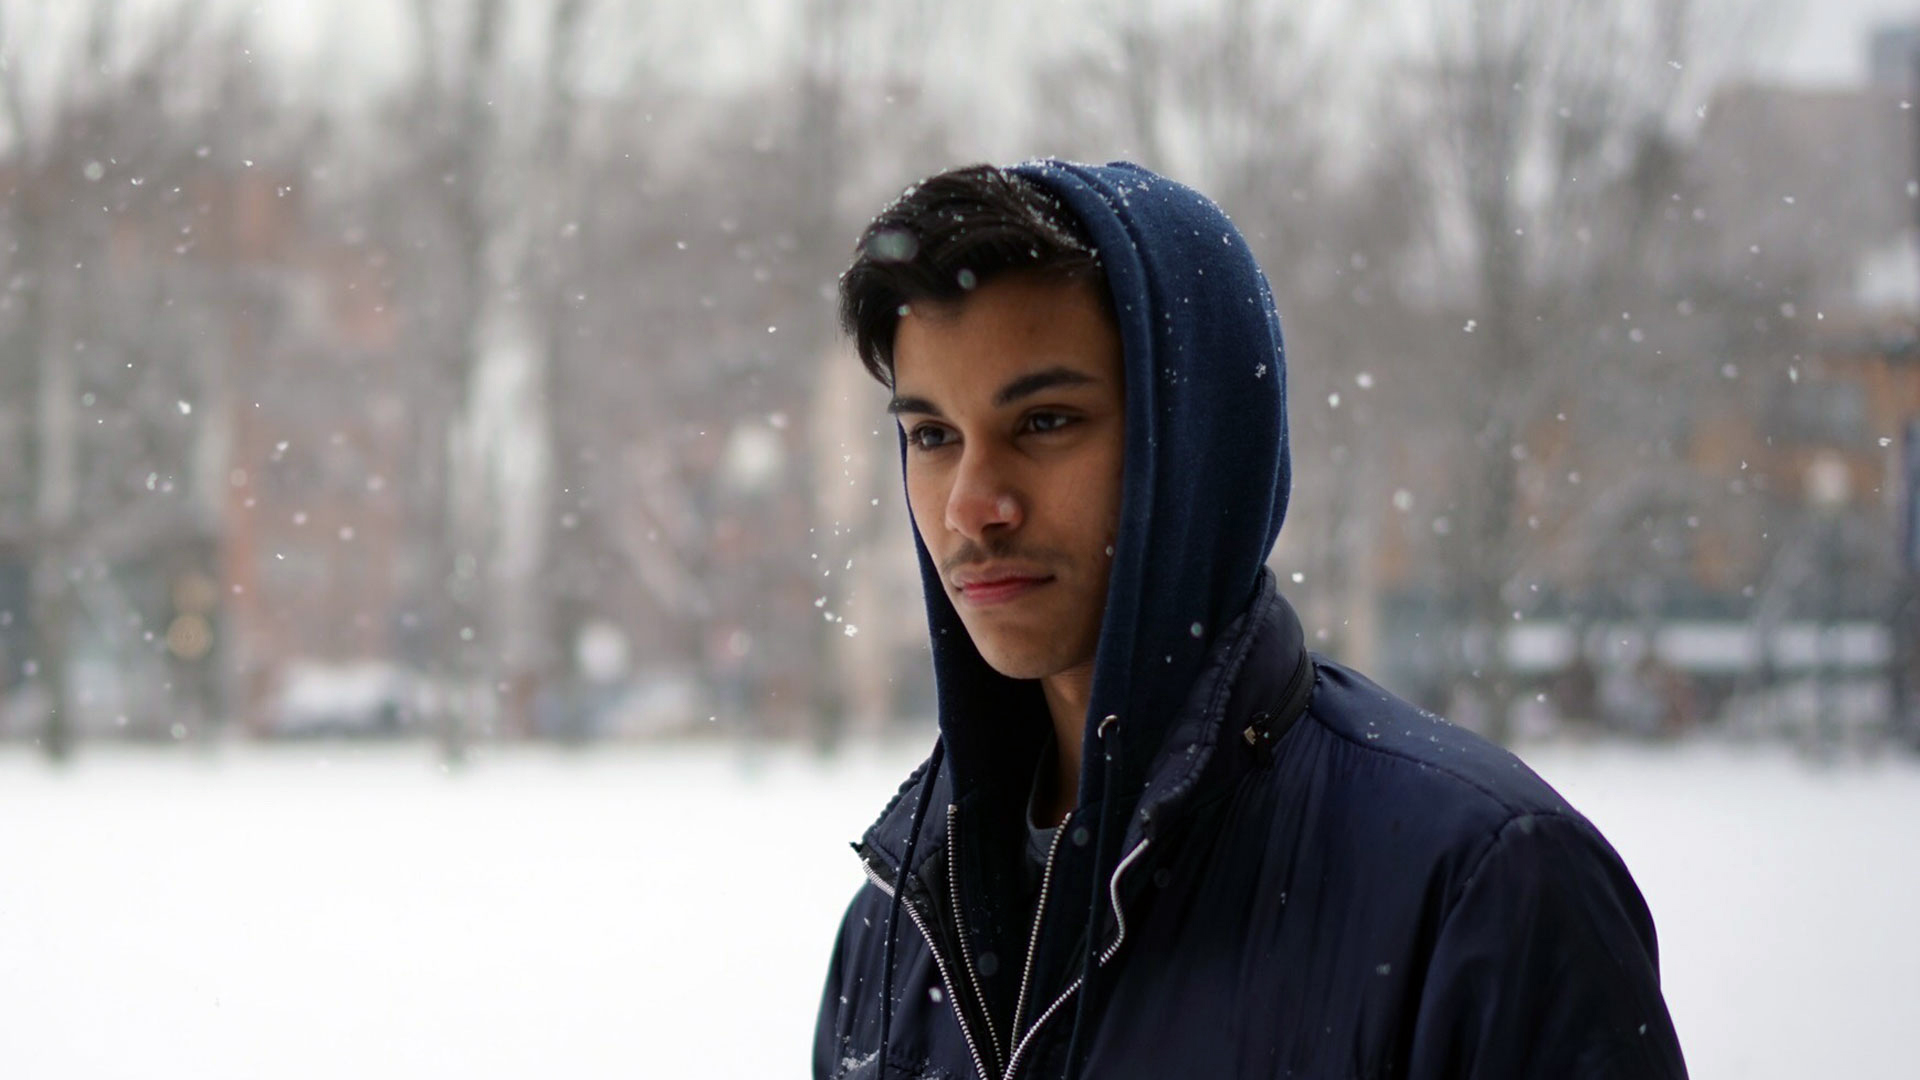 A few months after arriving, Ali experienced his first winter in New England